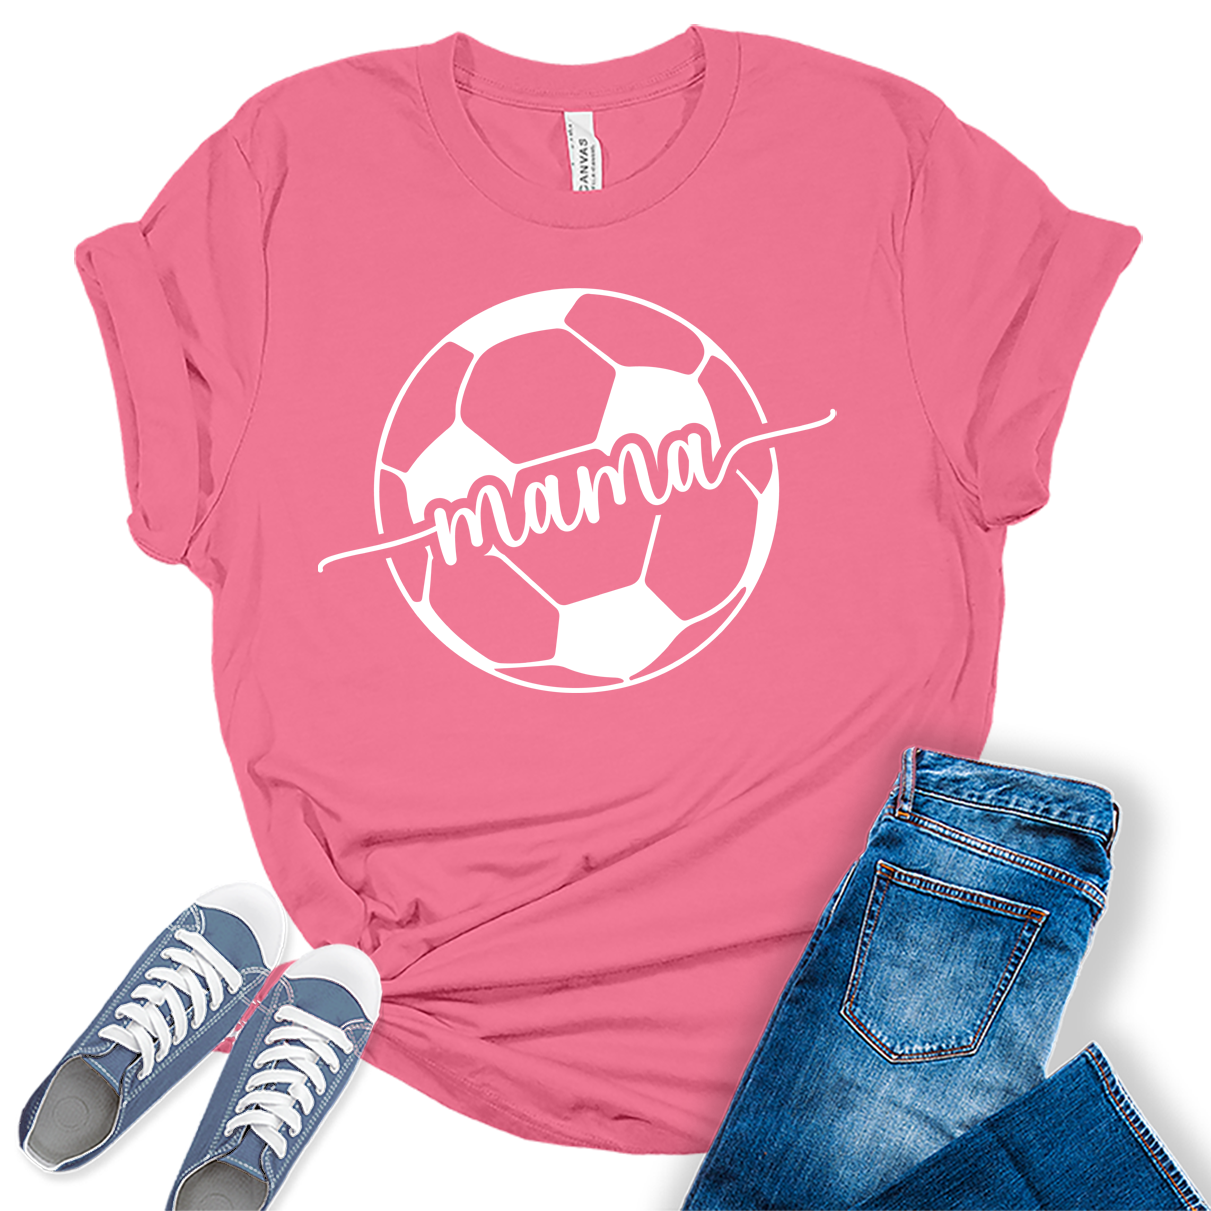 Soccer Mama Graphic Tees for Women